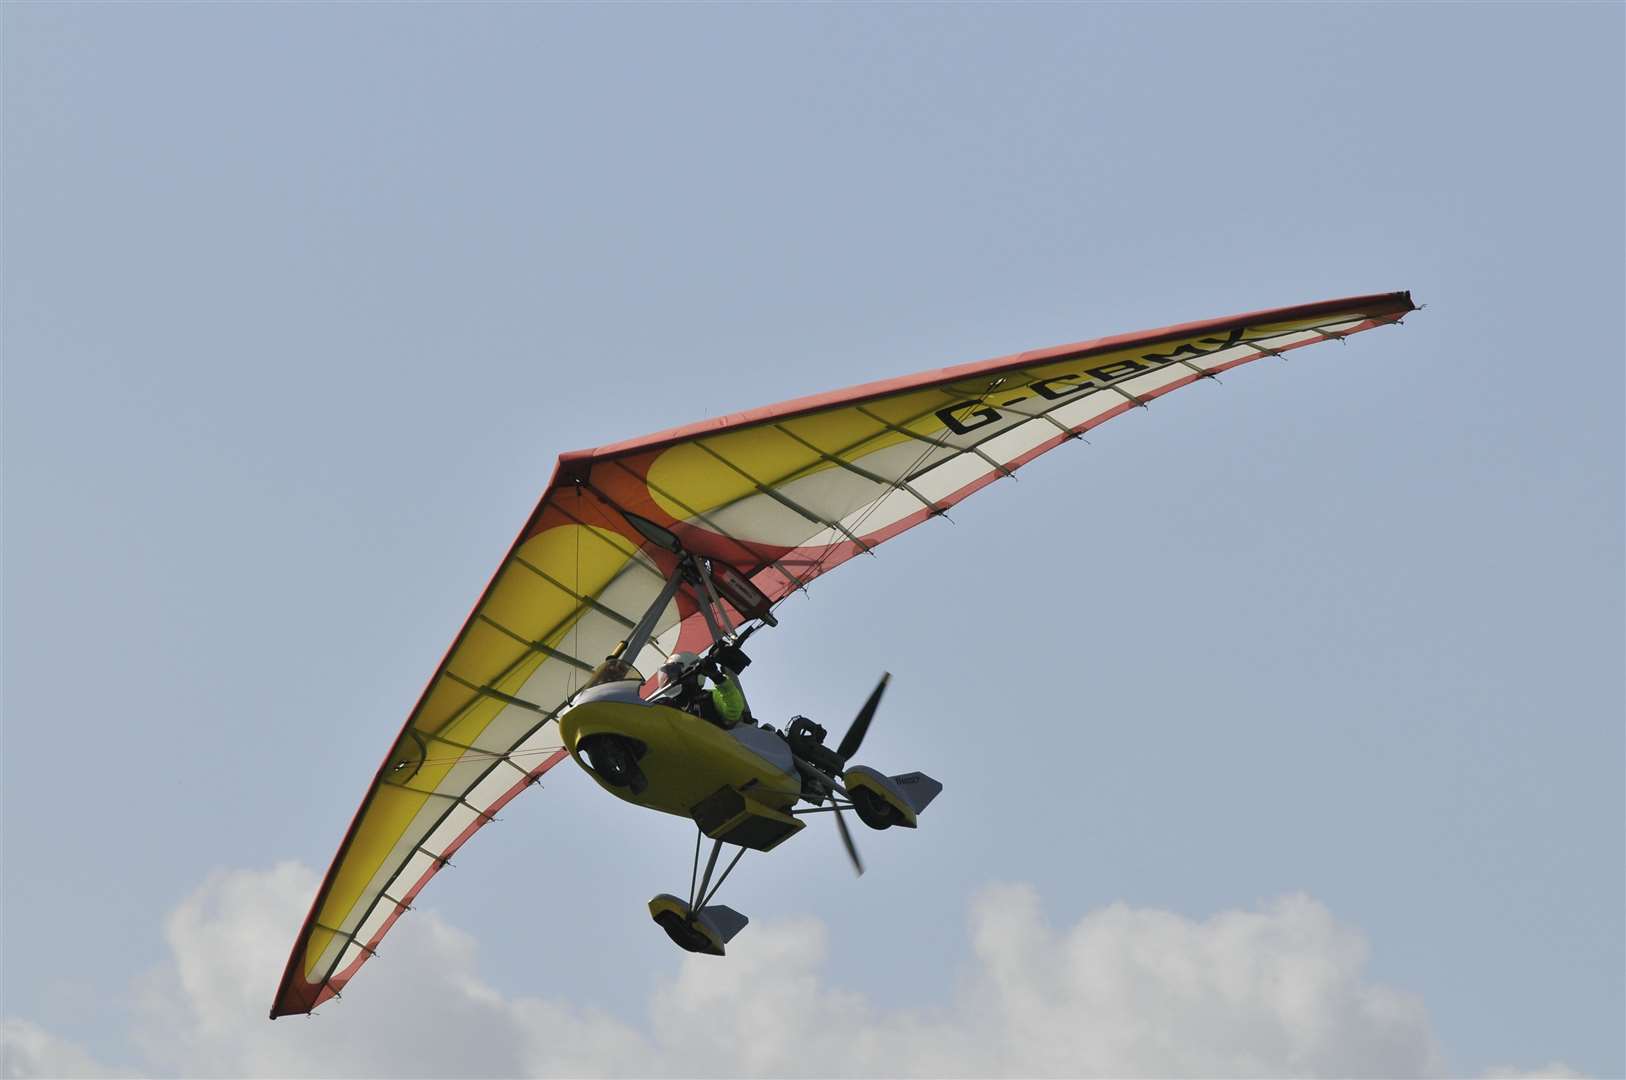 A member of the Kent Microlight Club flying over Sheppey